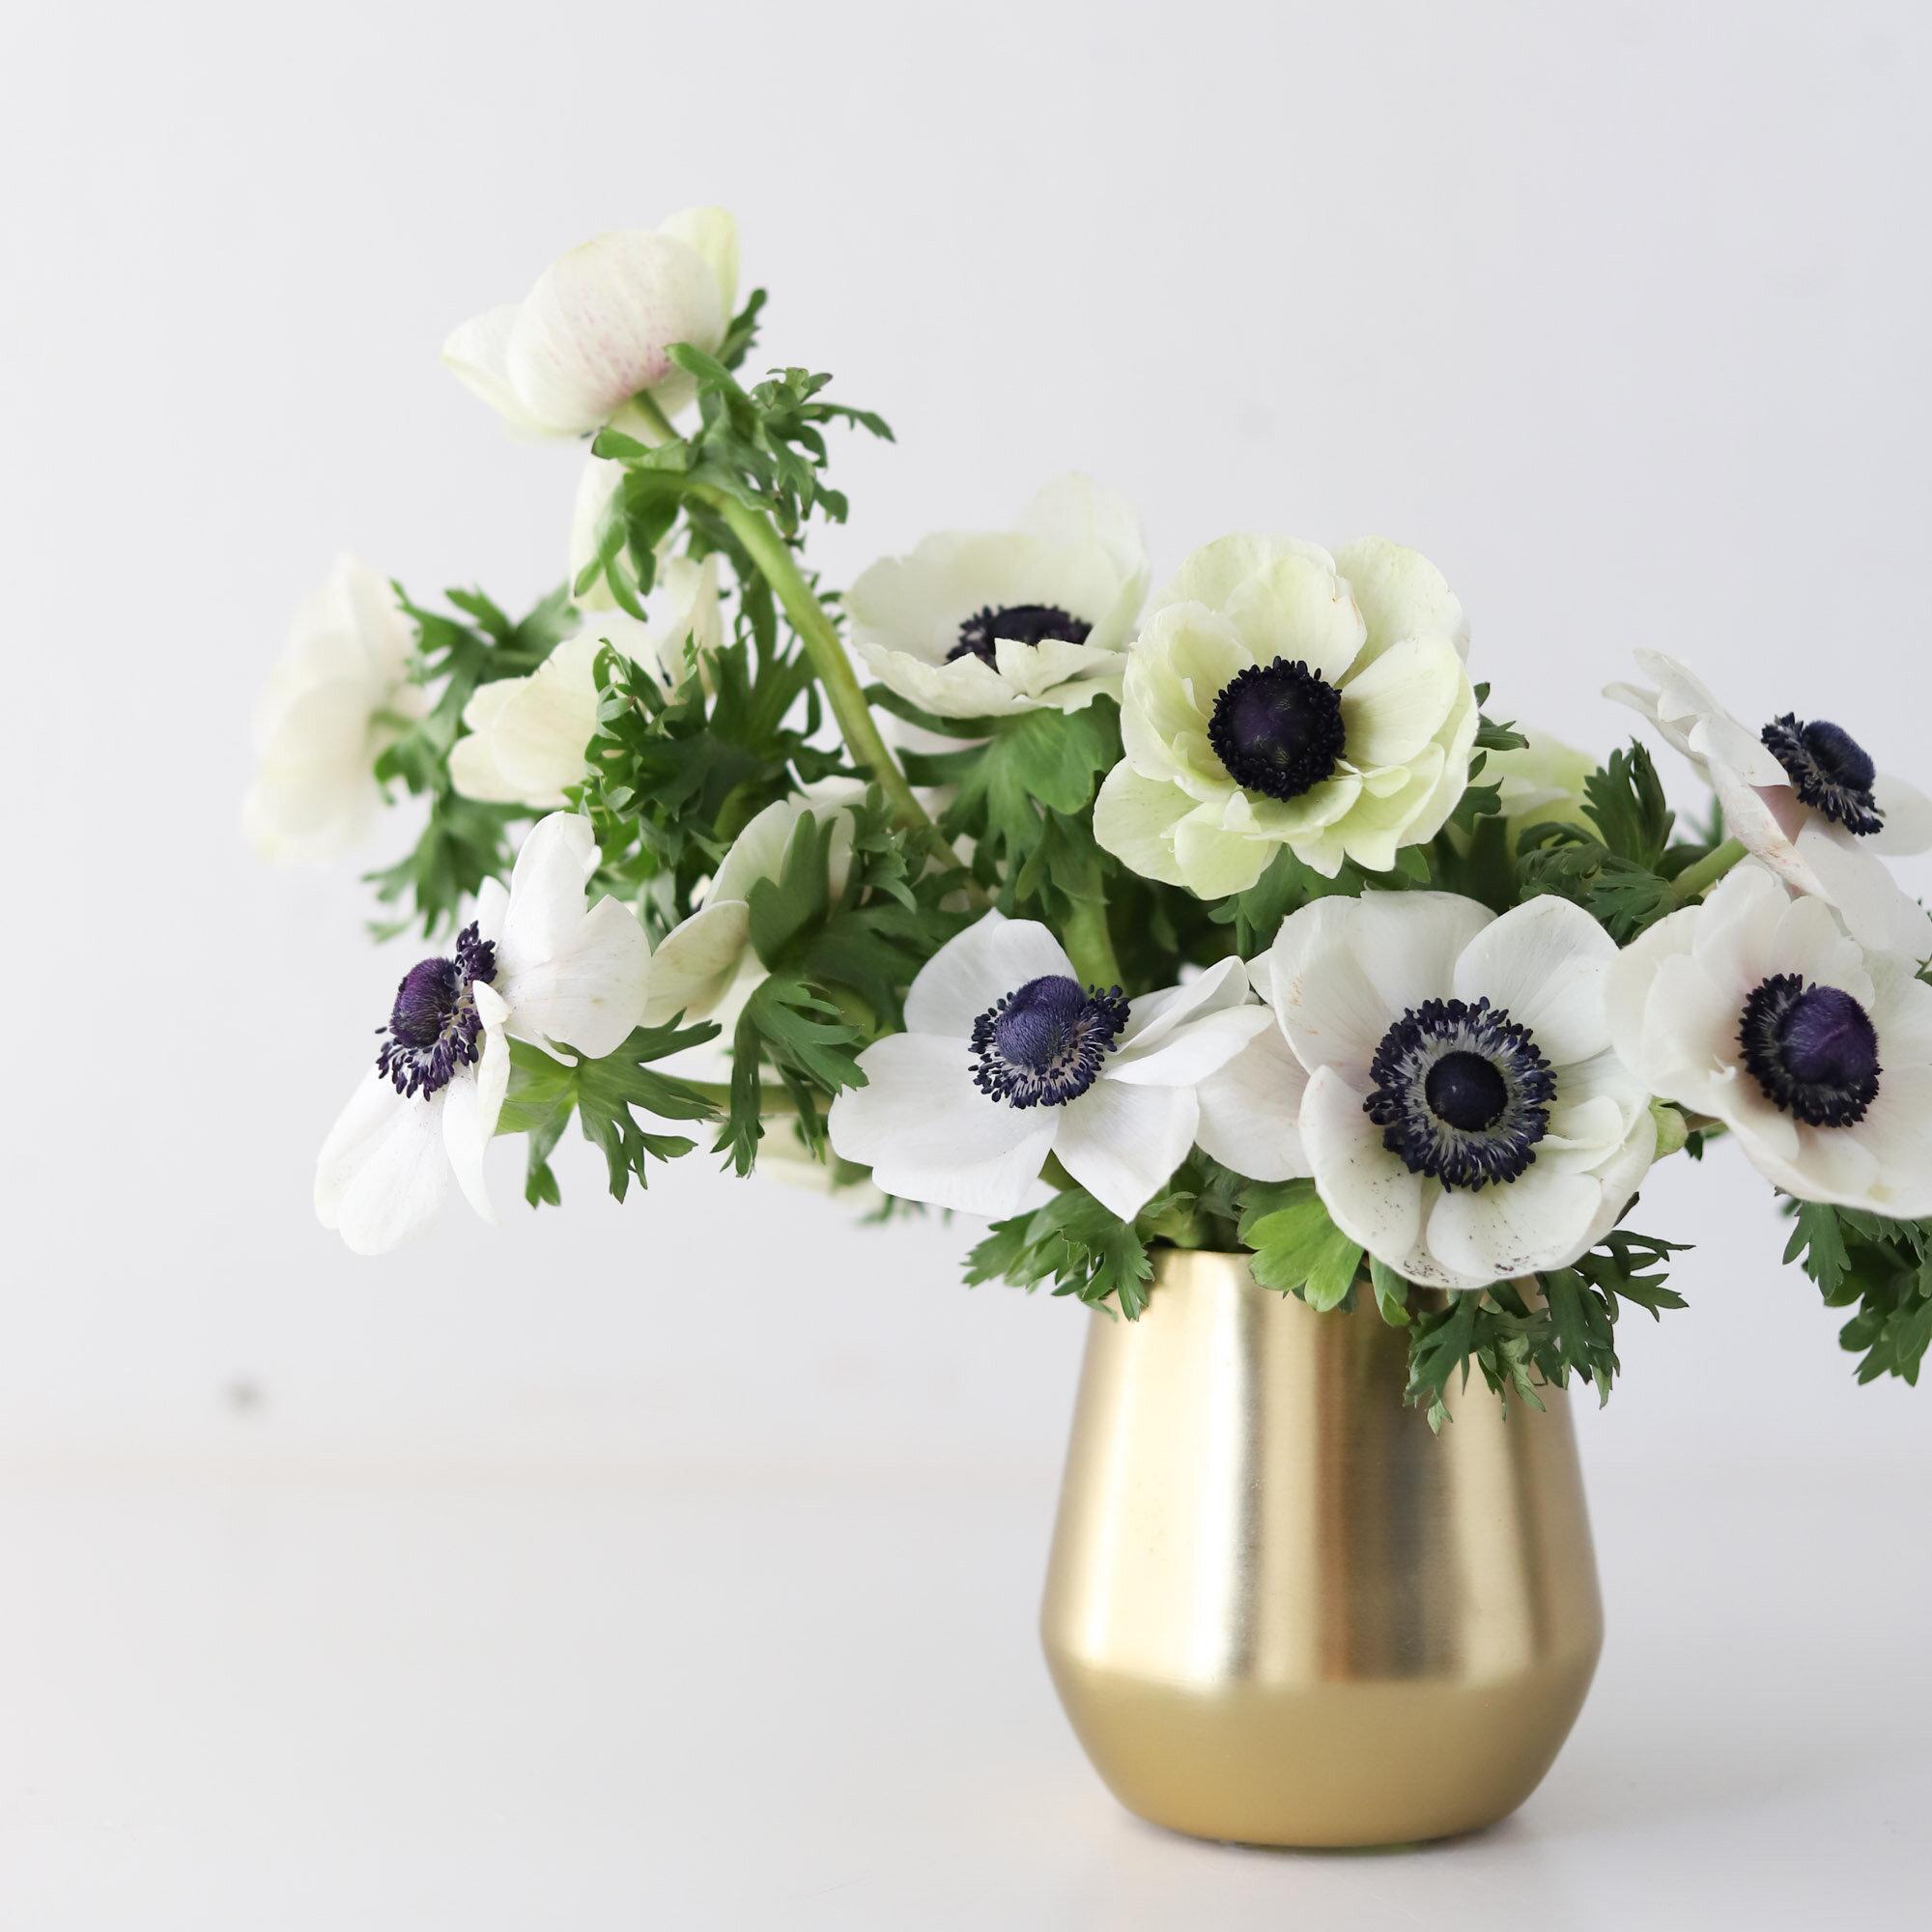 A bouquet of white Anemones in a gold vase